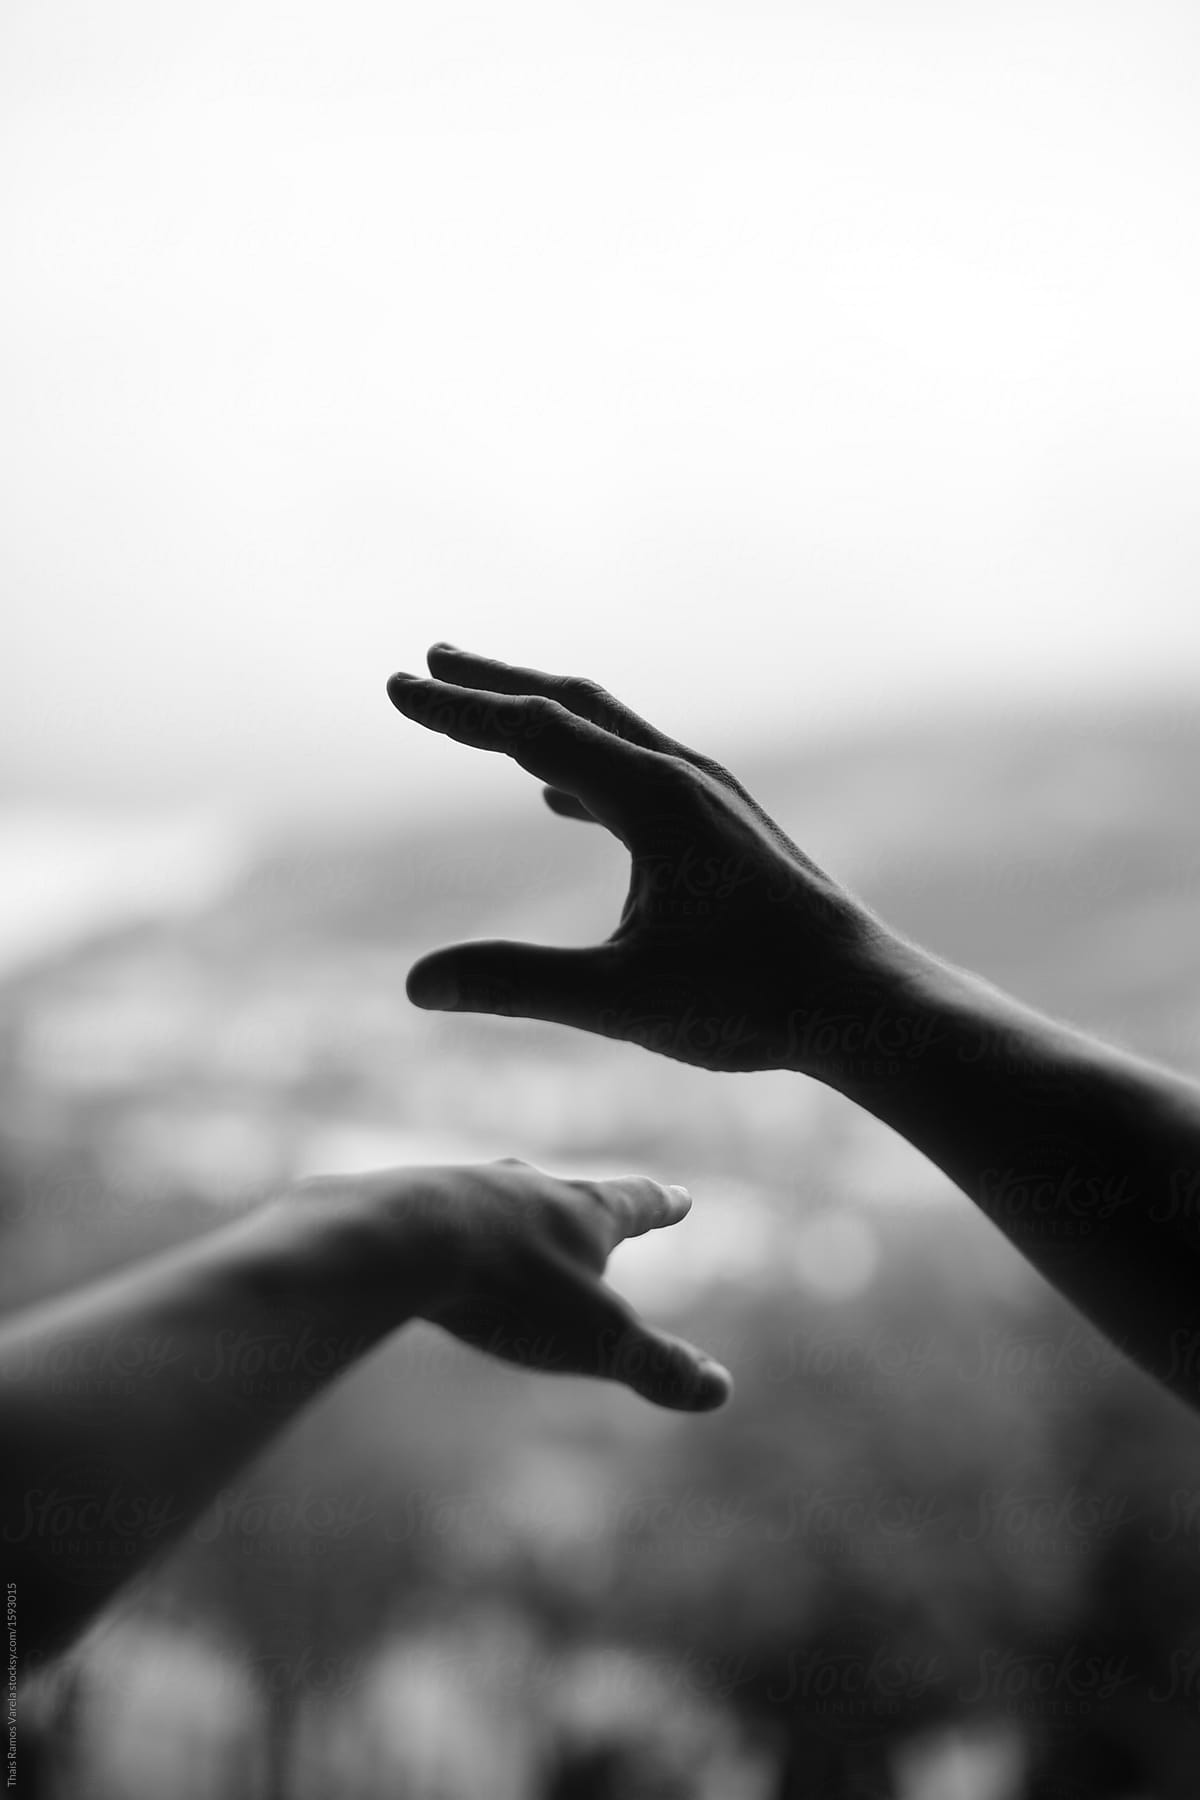 movement of two hands in black and white